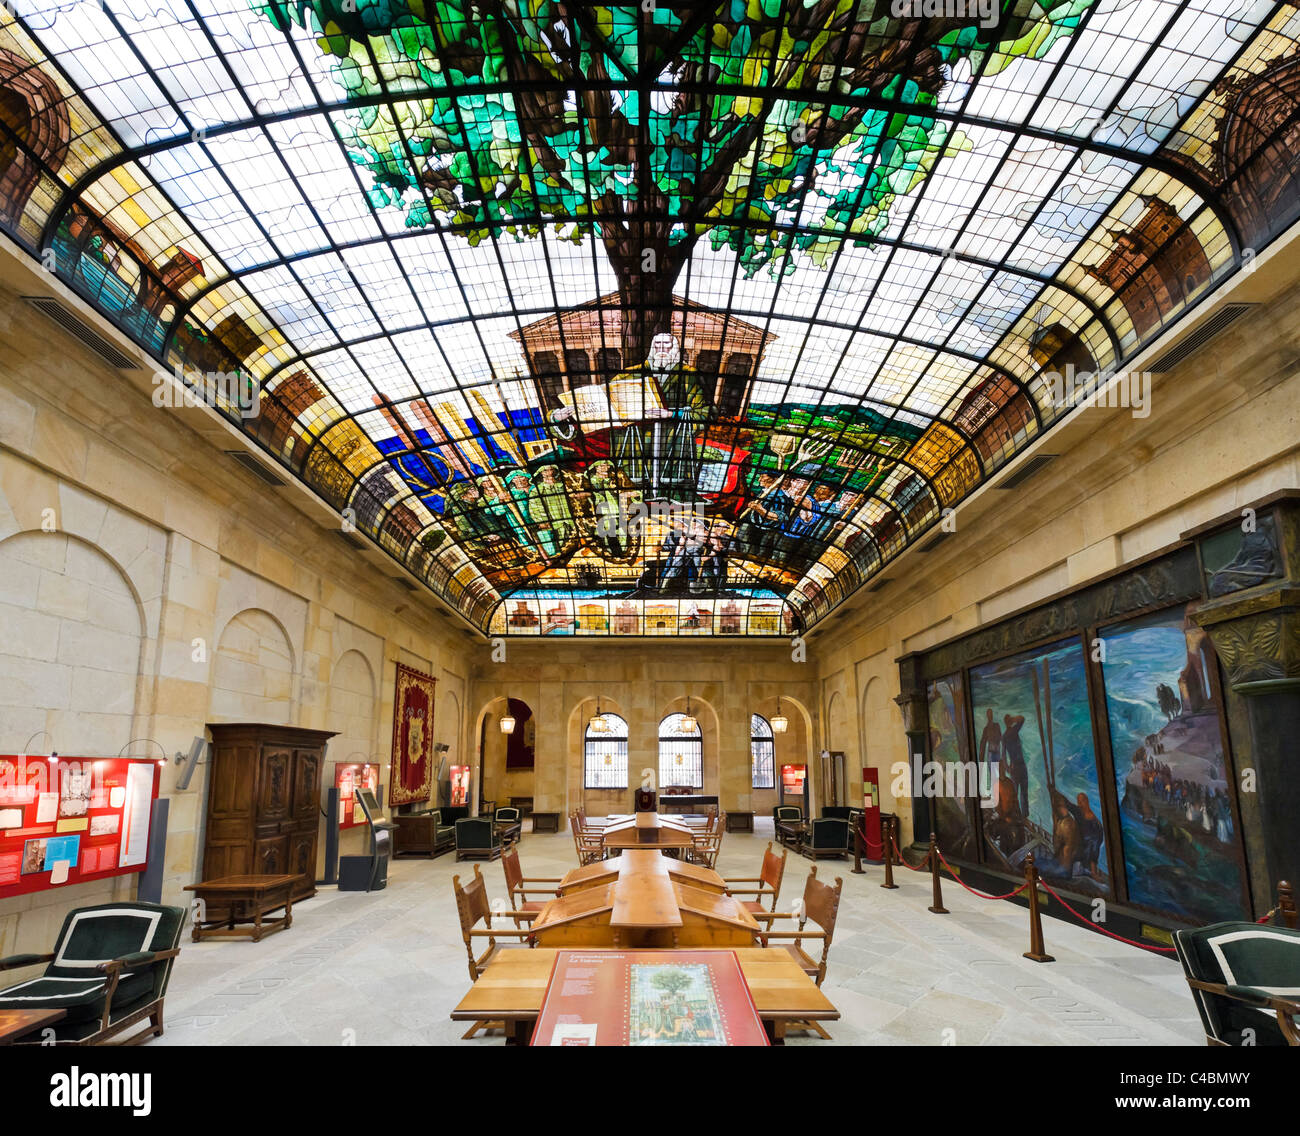 The Tree of Gernika stained glass ceiling in the Assembly House (Casa de las Juntas), Gernika (Guernica), Basque Country, Spain Stock Photo